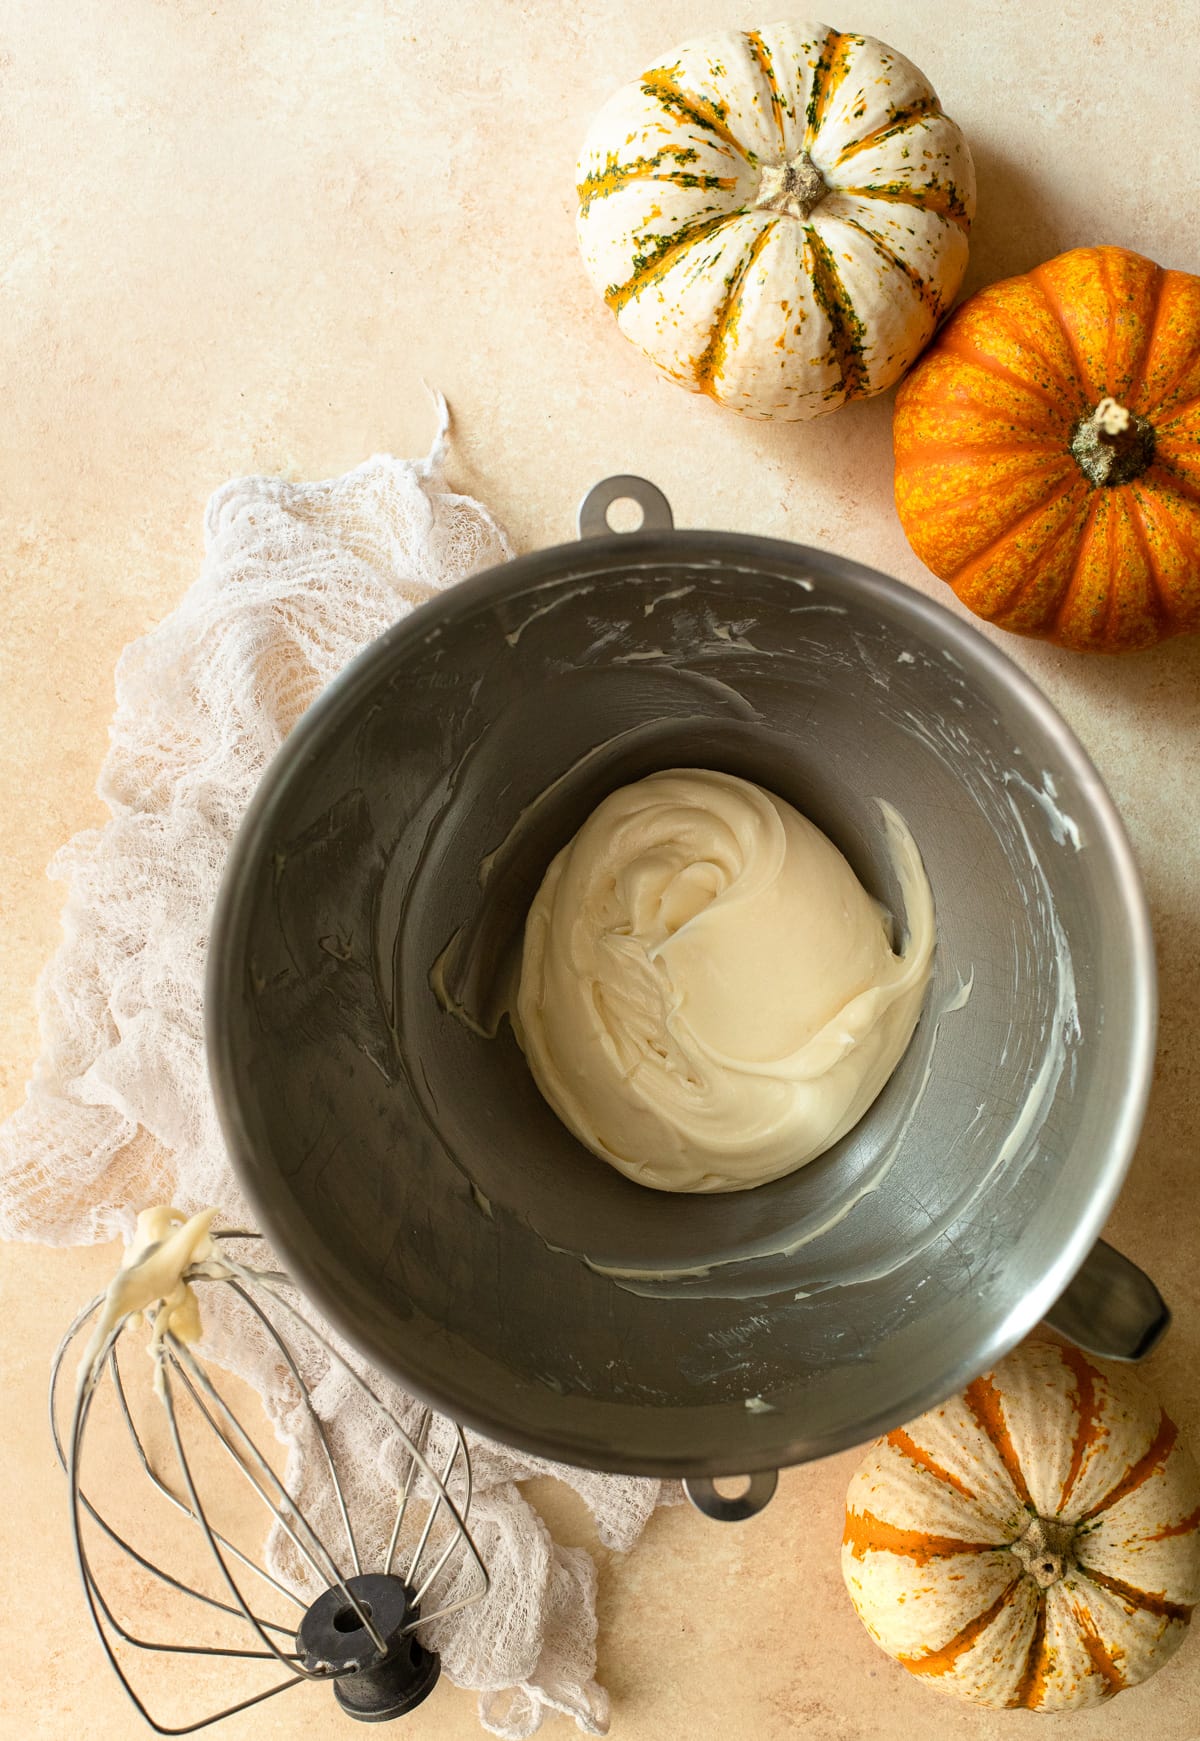 Homemade cream cheese frosting in a mixing bowl.